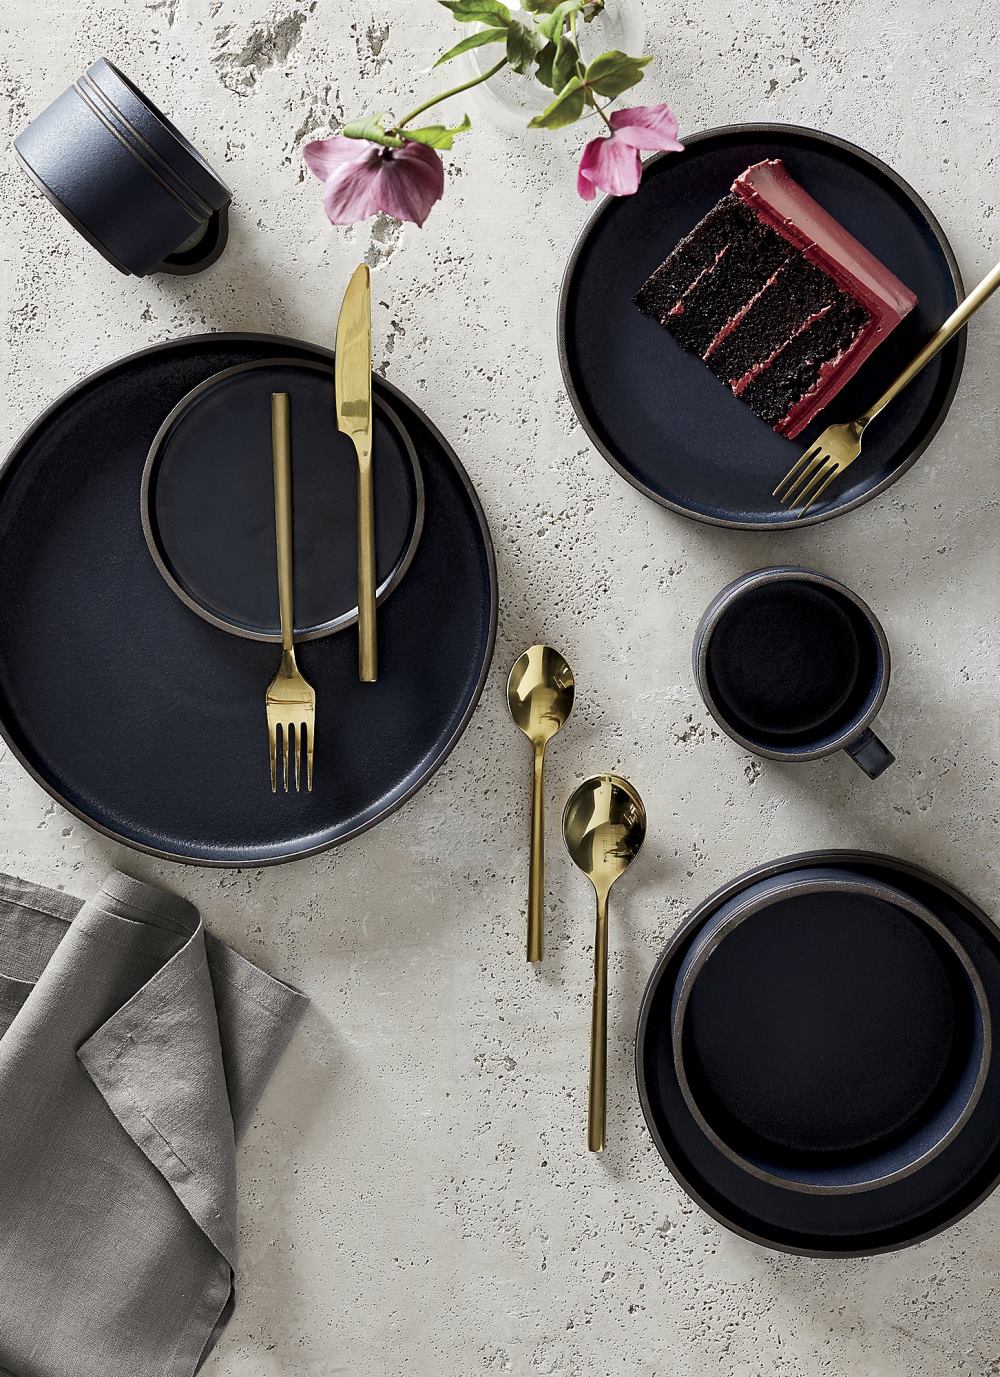 Dark dishware adds decadence and depth to the fall table